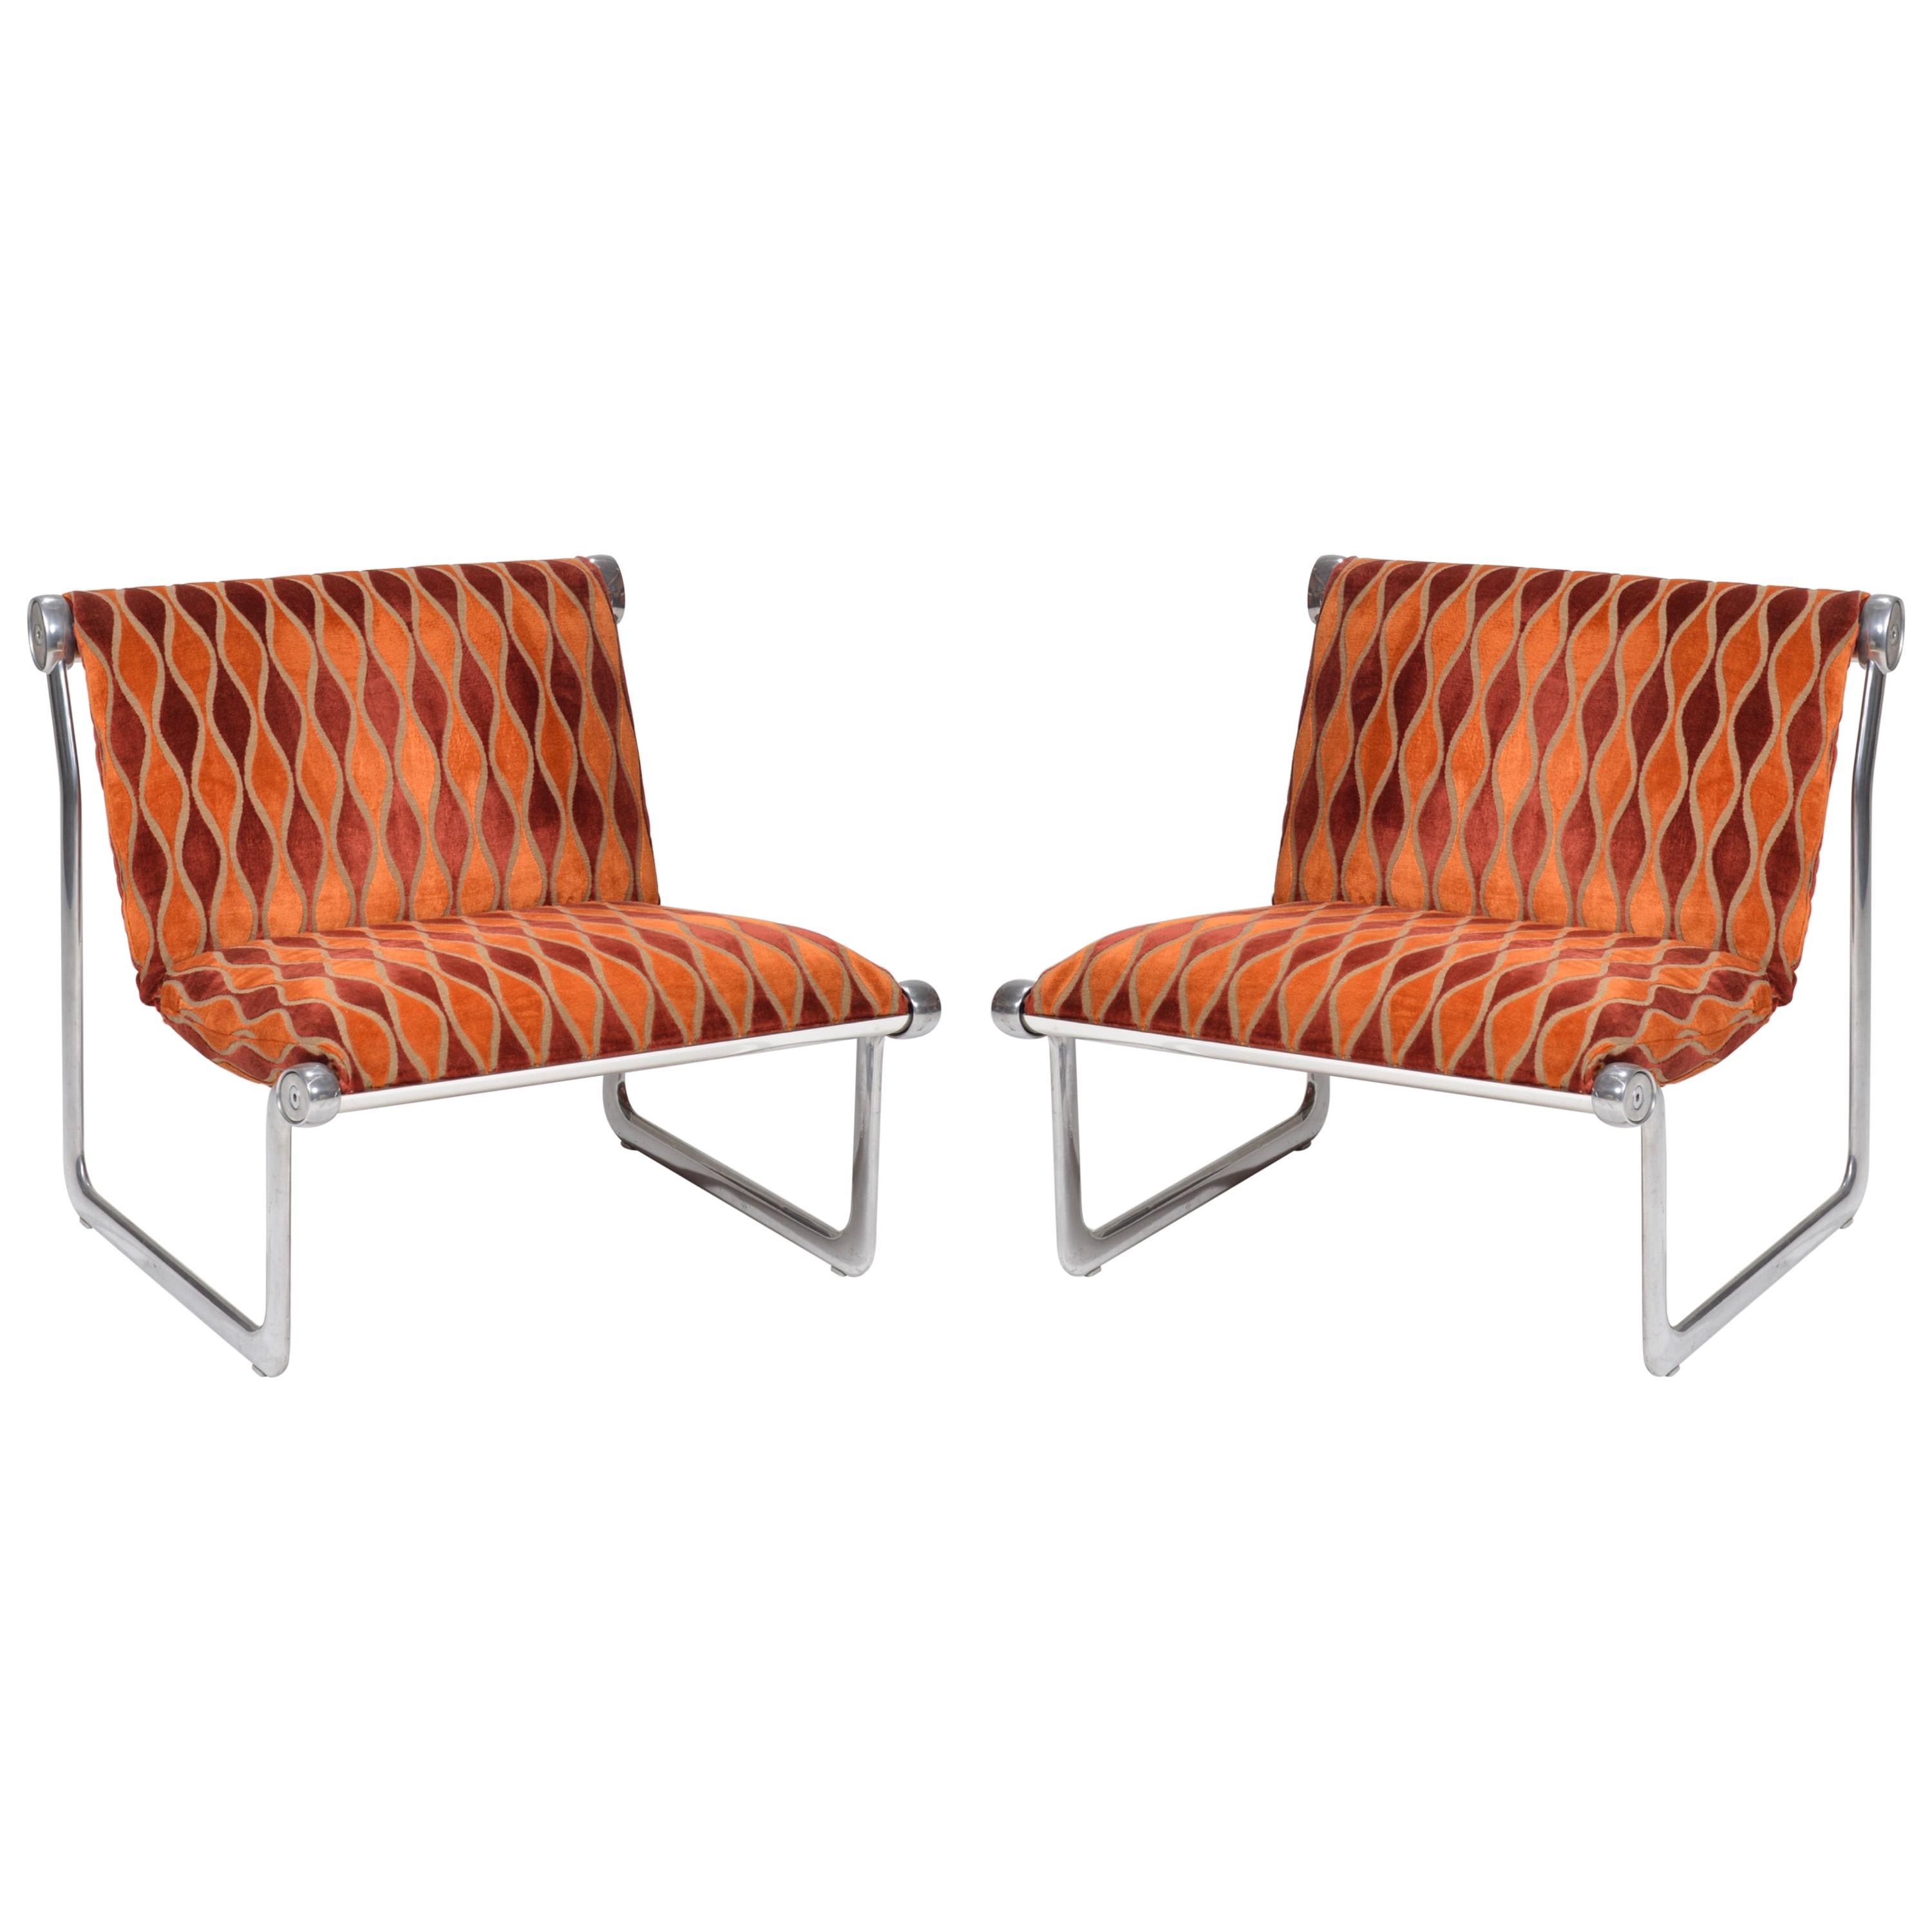 Sling Lounge Chairs by Hannah Morrison for Knoll International